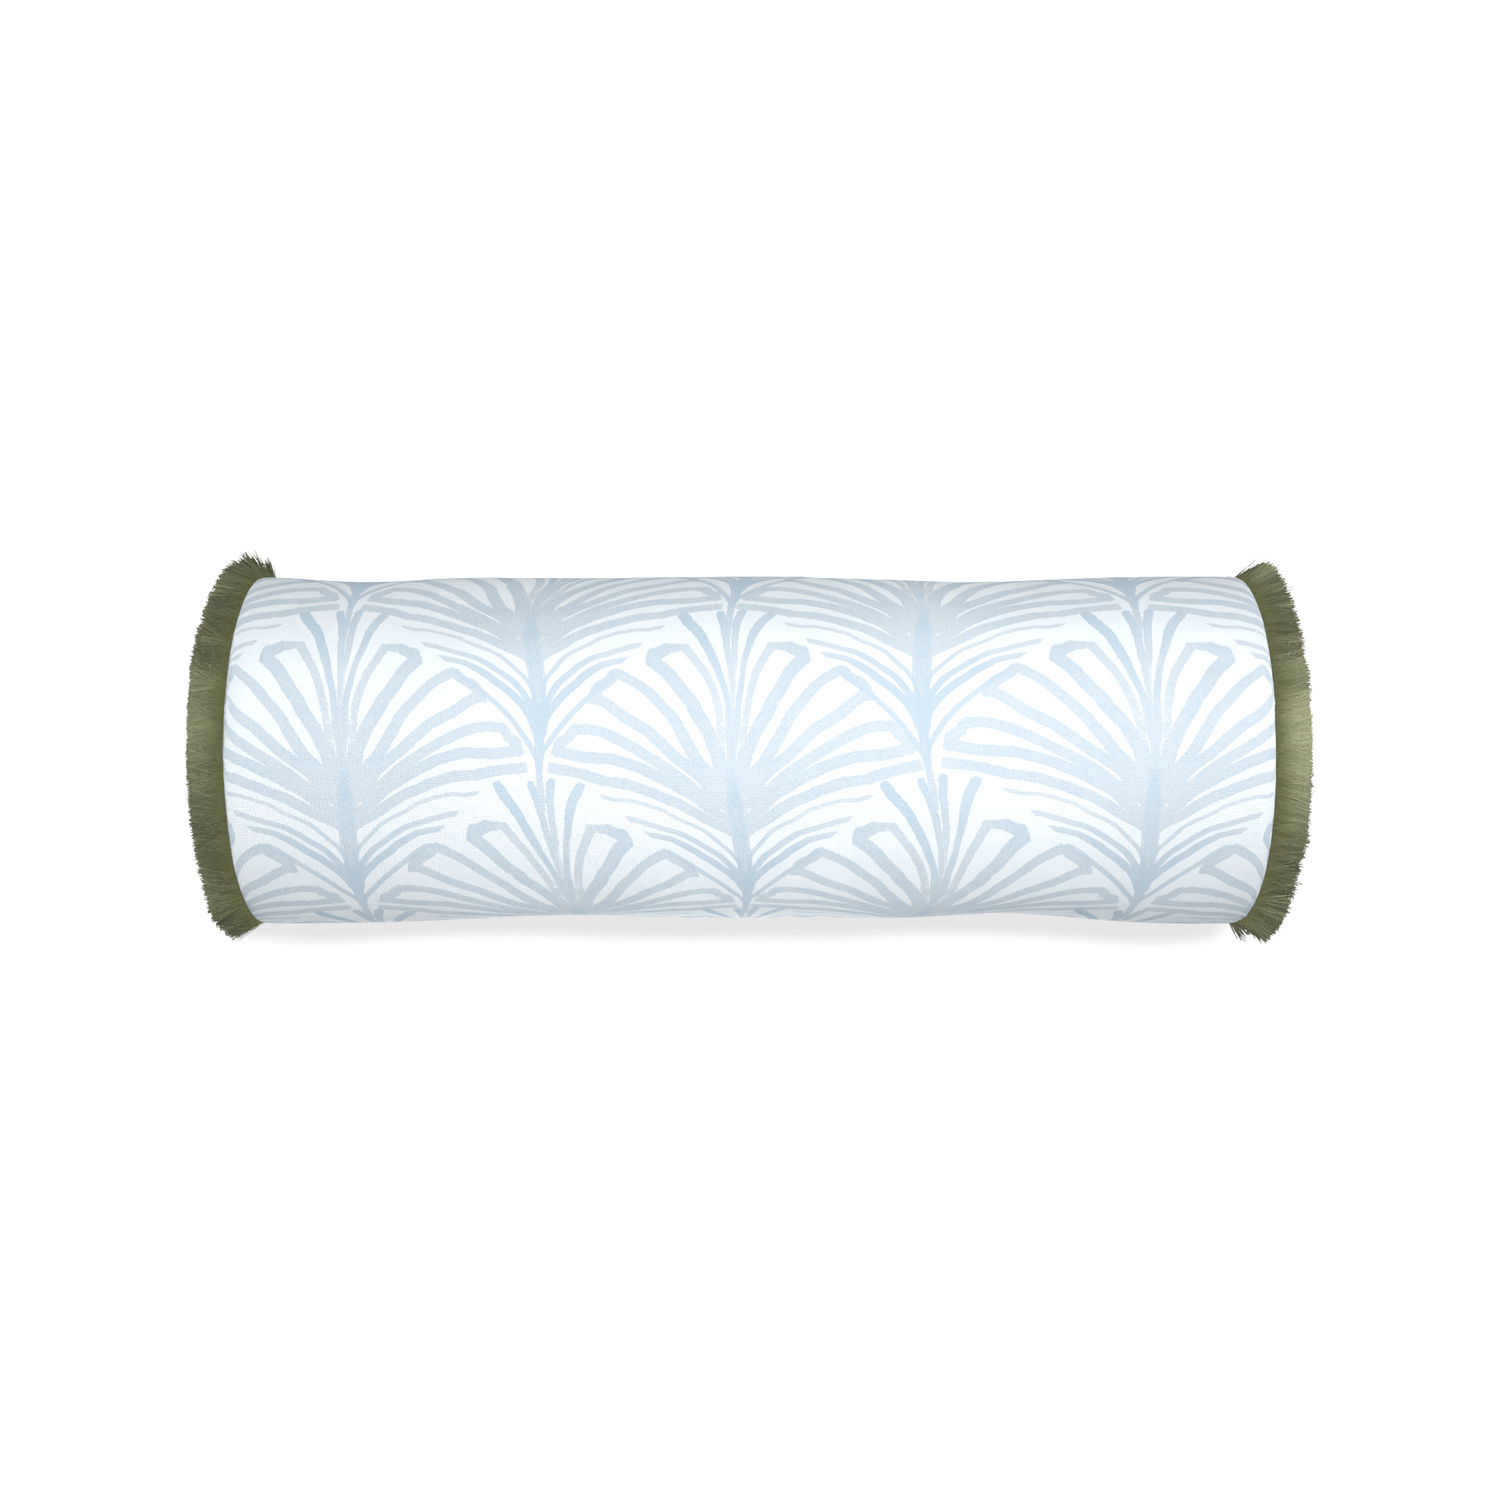 Bolster suzy sky custom sky blue palmpillow with sage fringe on white background